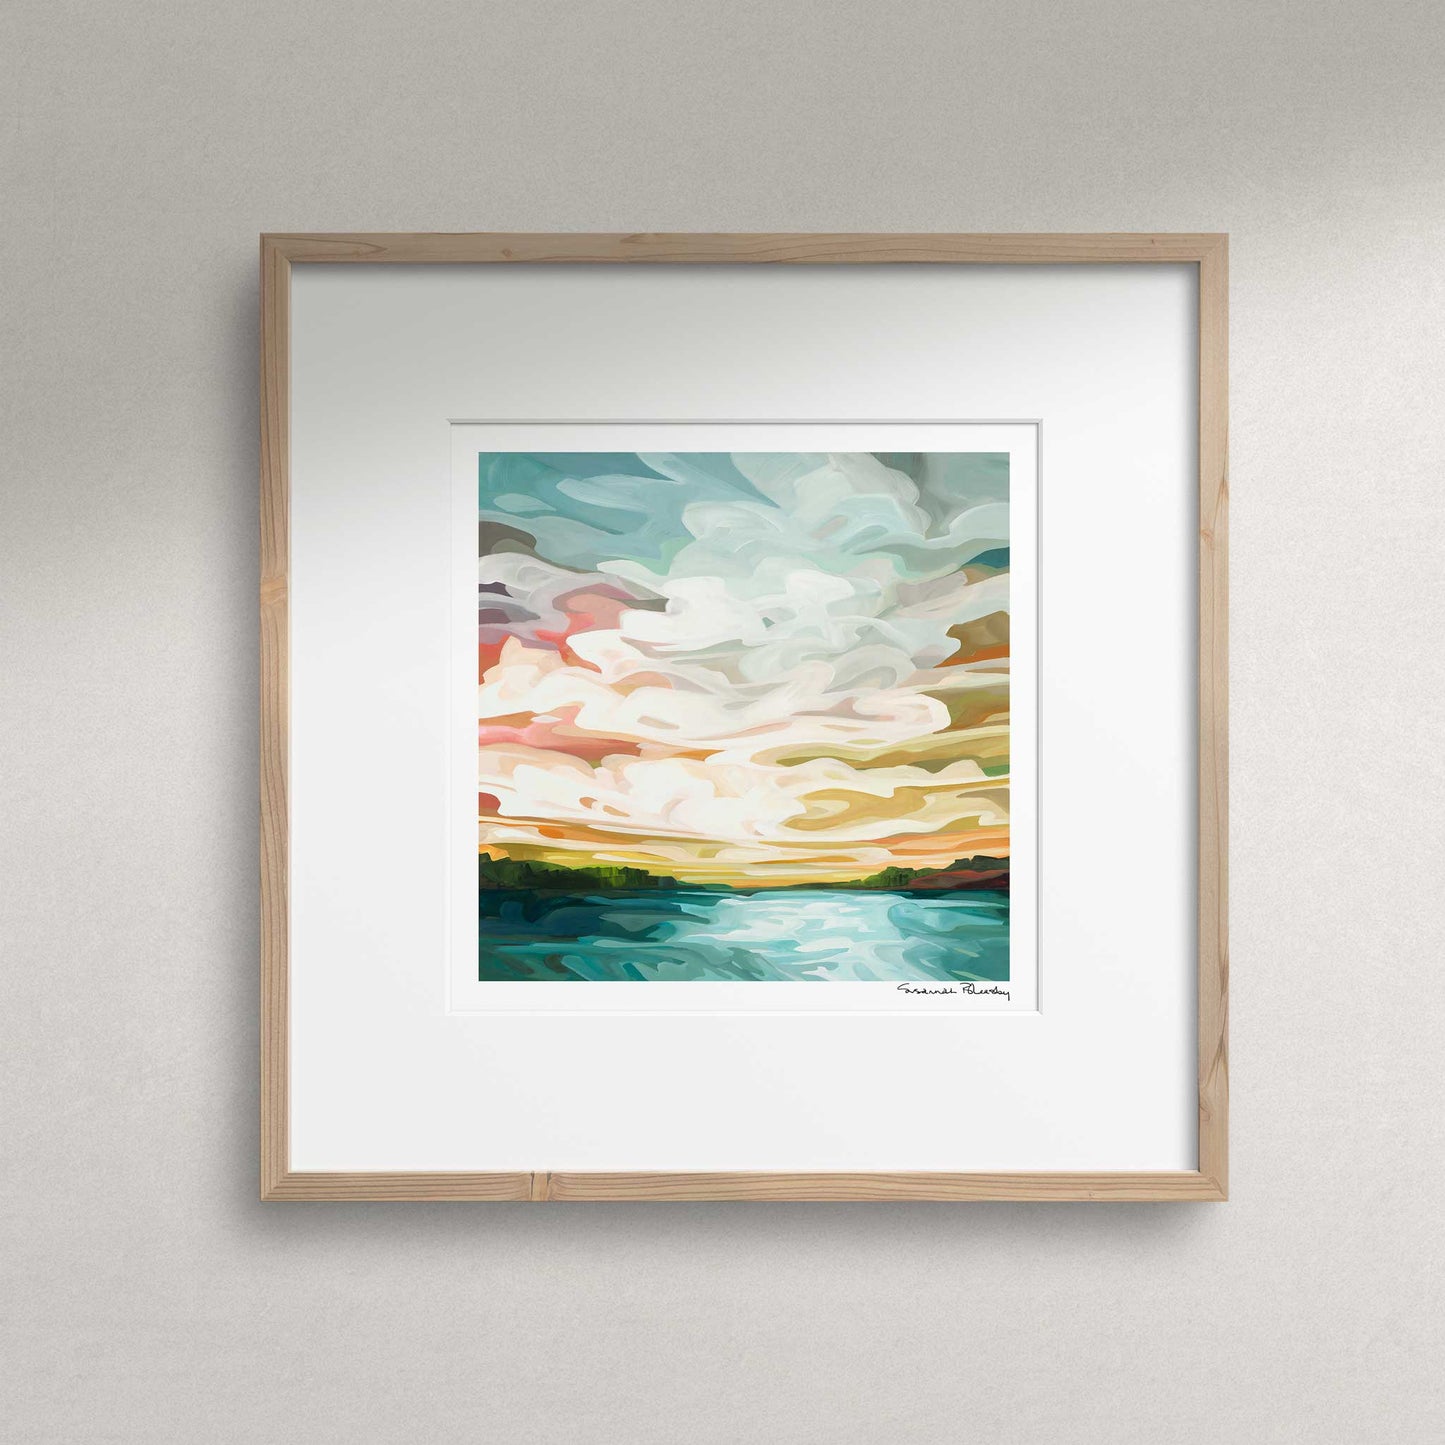 Sunrise painting 10x10 fine art print by Canadian abstract artist Susannah Bleasby